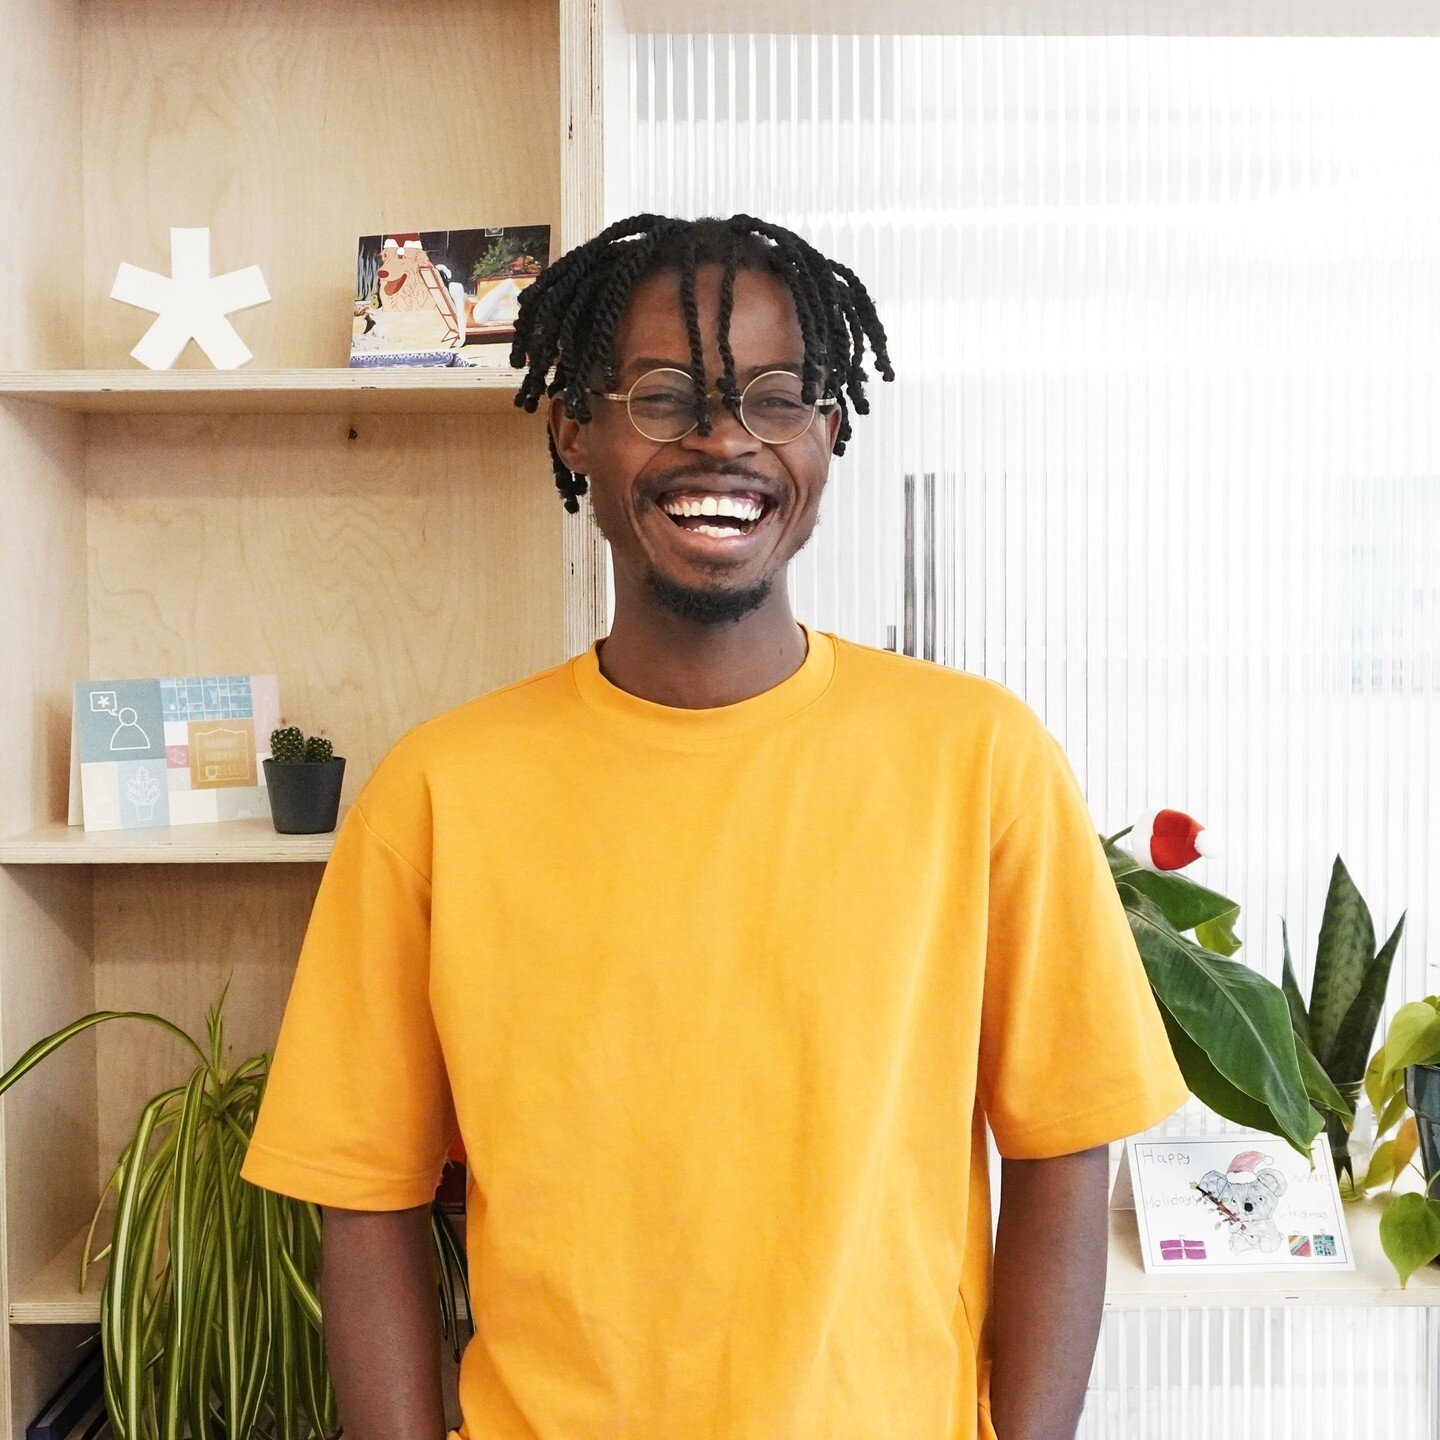 A warm welcome to Guershom!⁠
⁠
Guershom has been working with us part-time since September when he began his masters degree at UBC. With interests in digital fabrication, graphic novels, and photography, he leads with curiosity and an artistic eye. G